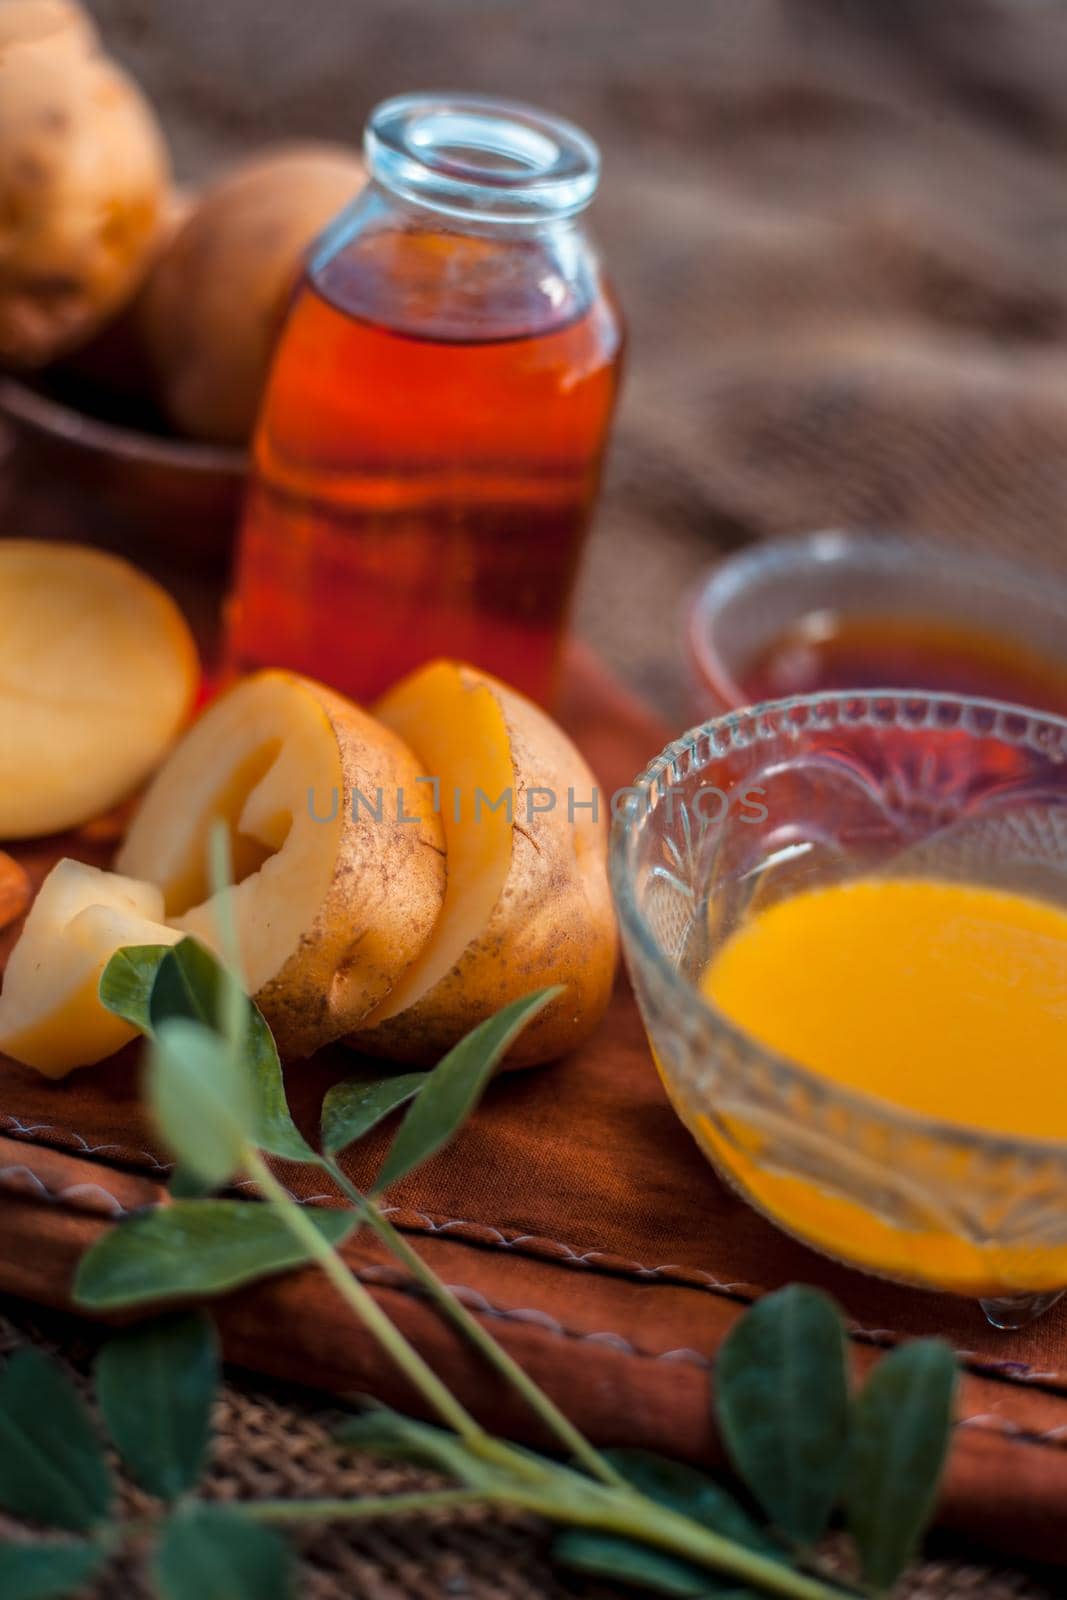 Glowing face mask of potato juice in a glass bowl on brown colored surface along with some Potato juice,honey and almond oil.Horizontal shot.To eliminate skin rashes, remove impurities,etc.